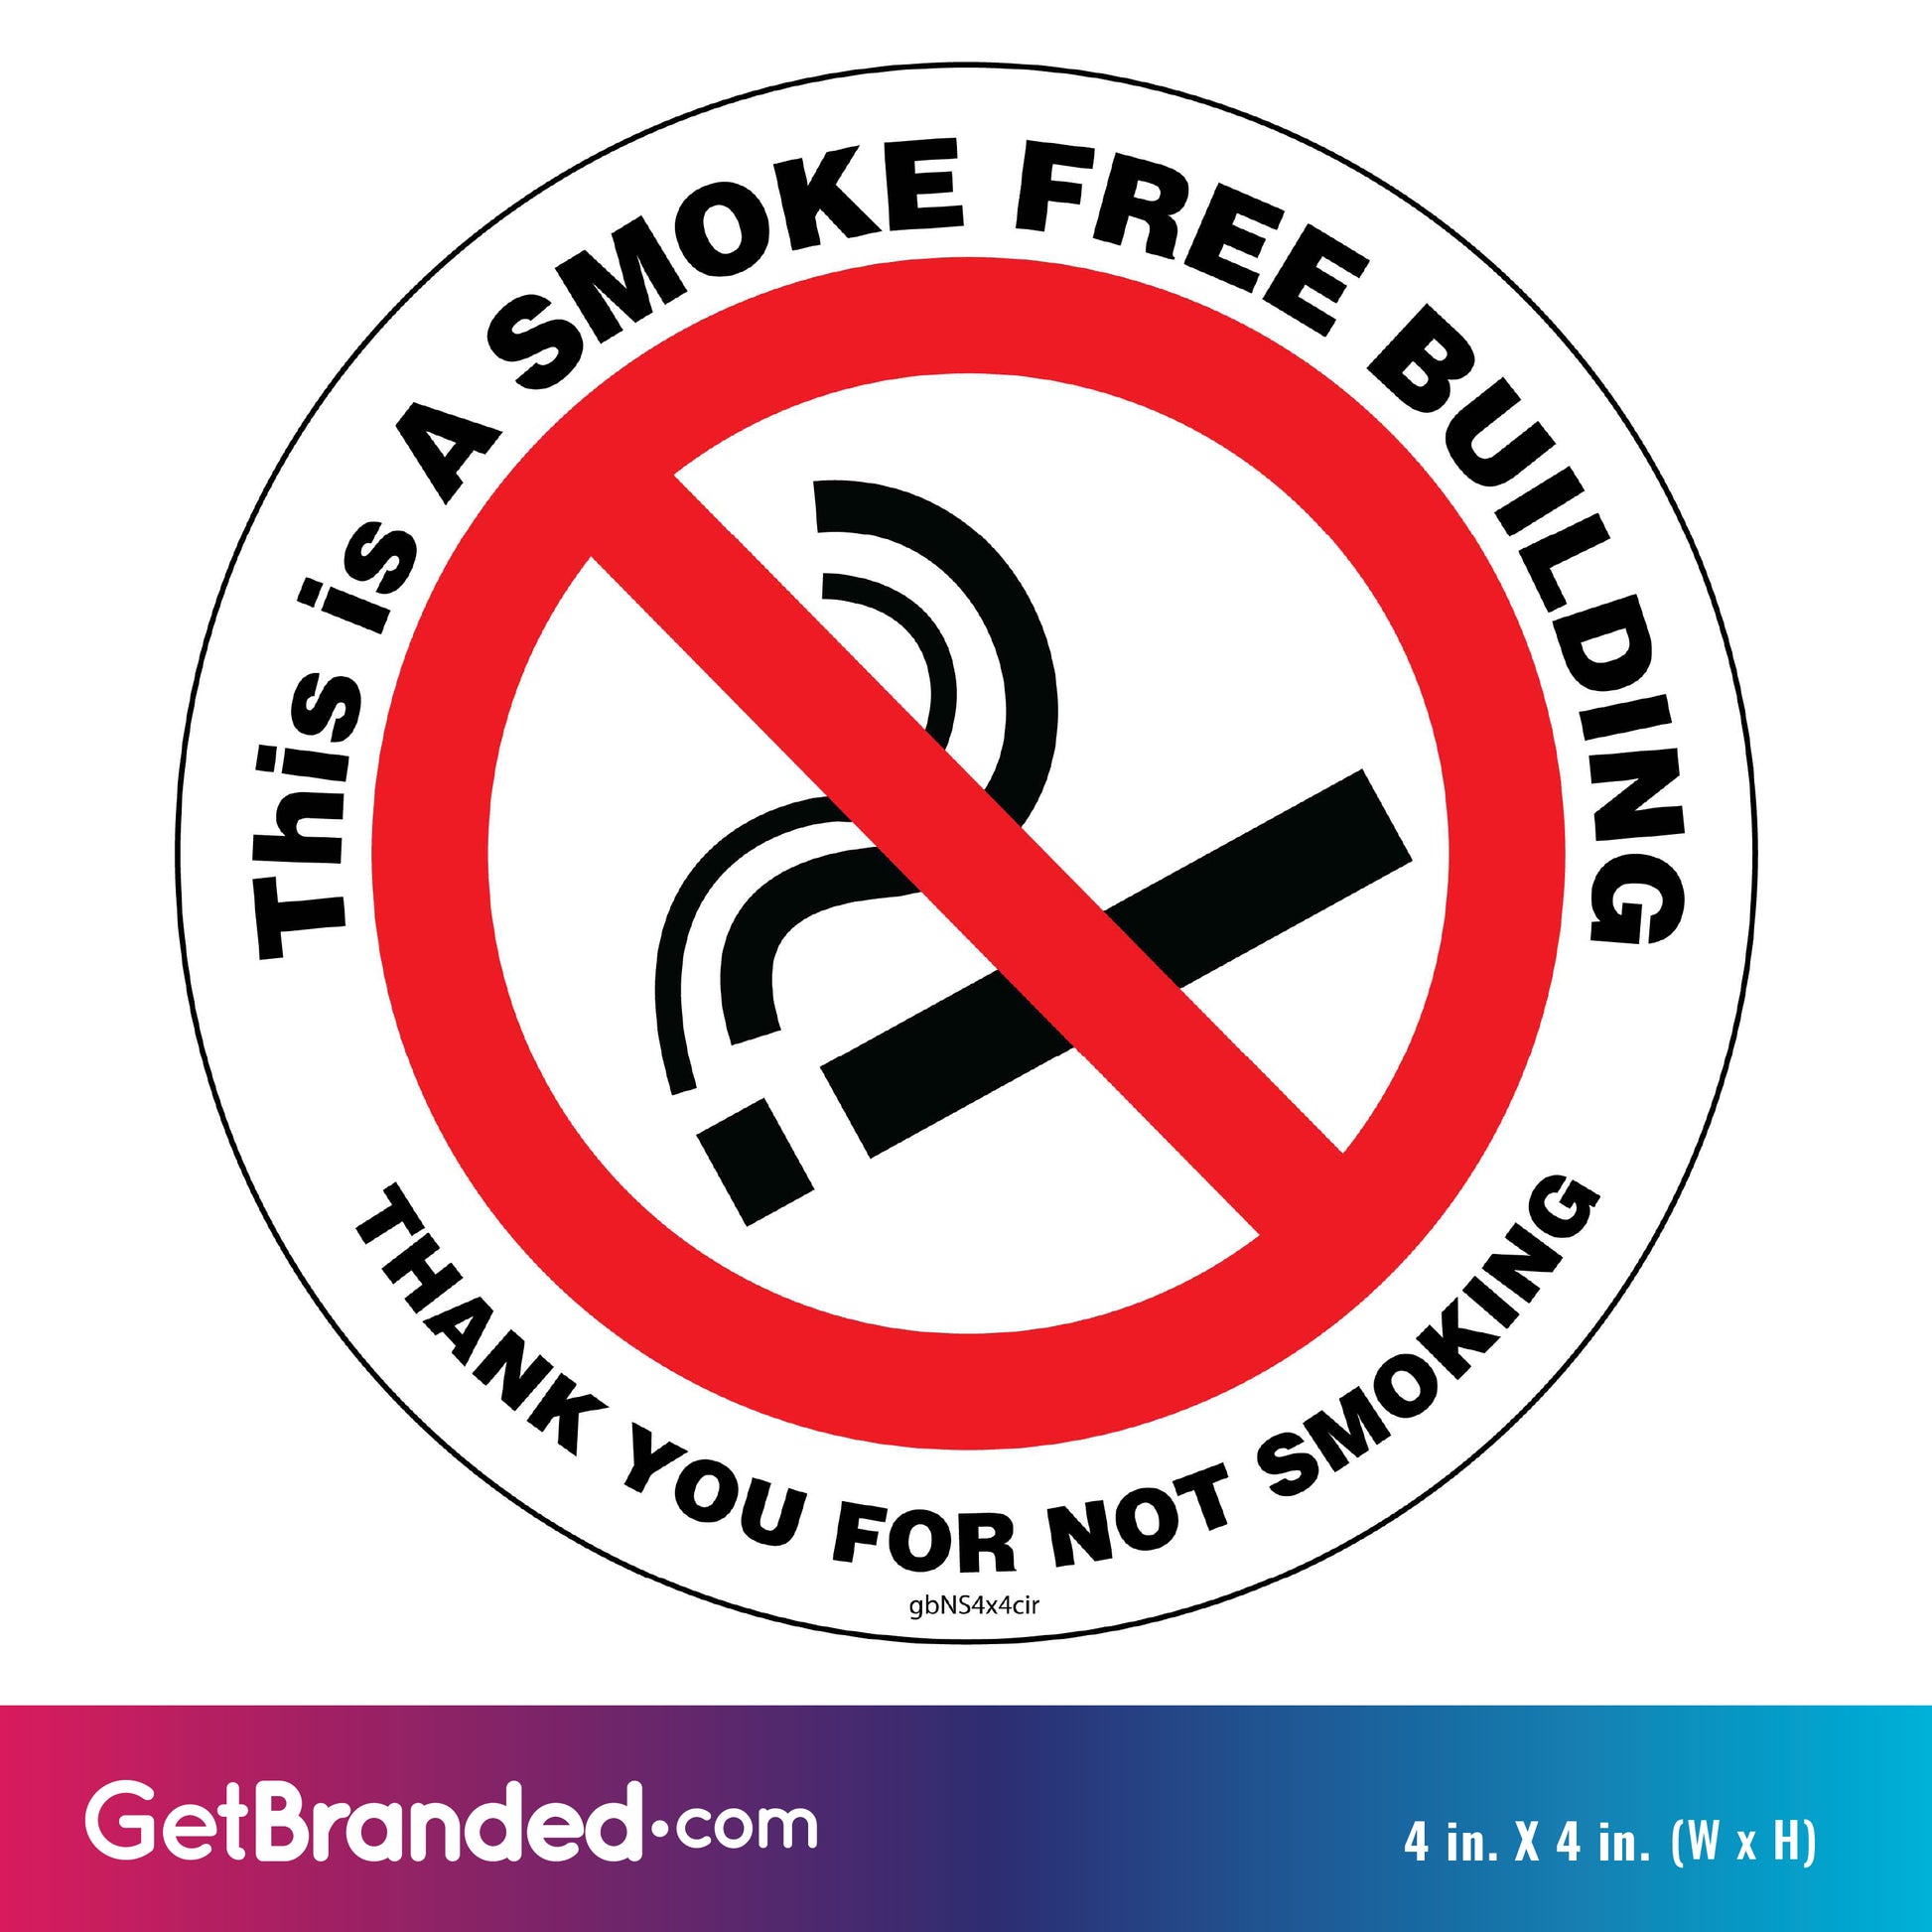 This is a Smoke Free Building Circle Decal size guide.